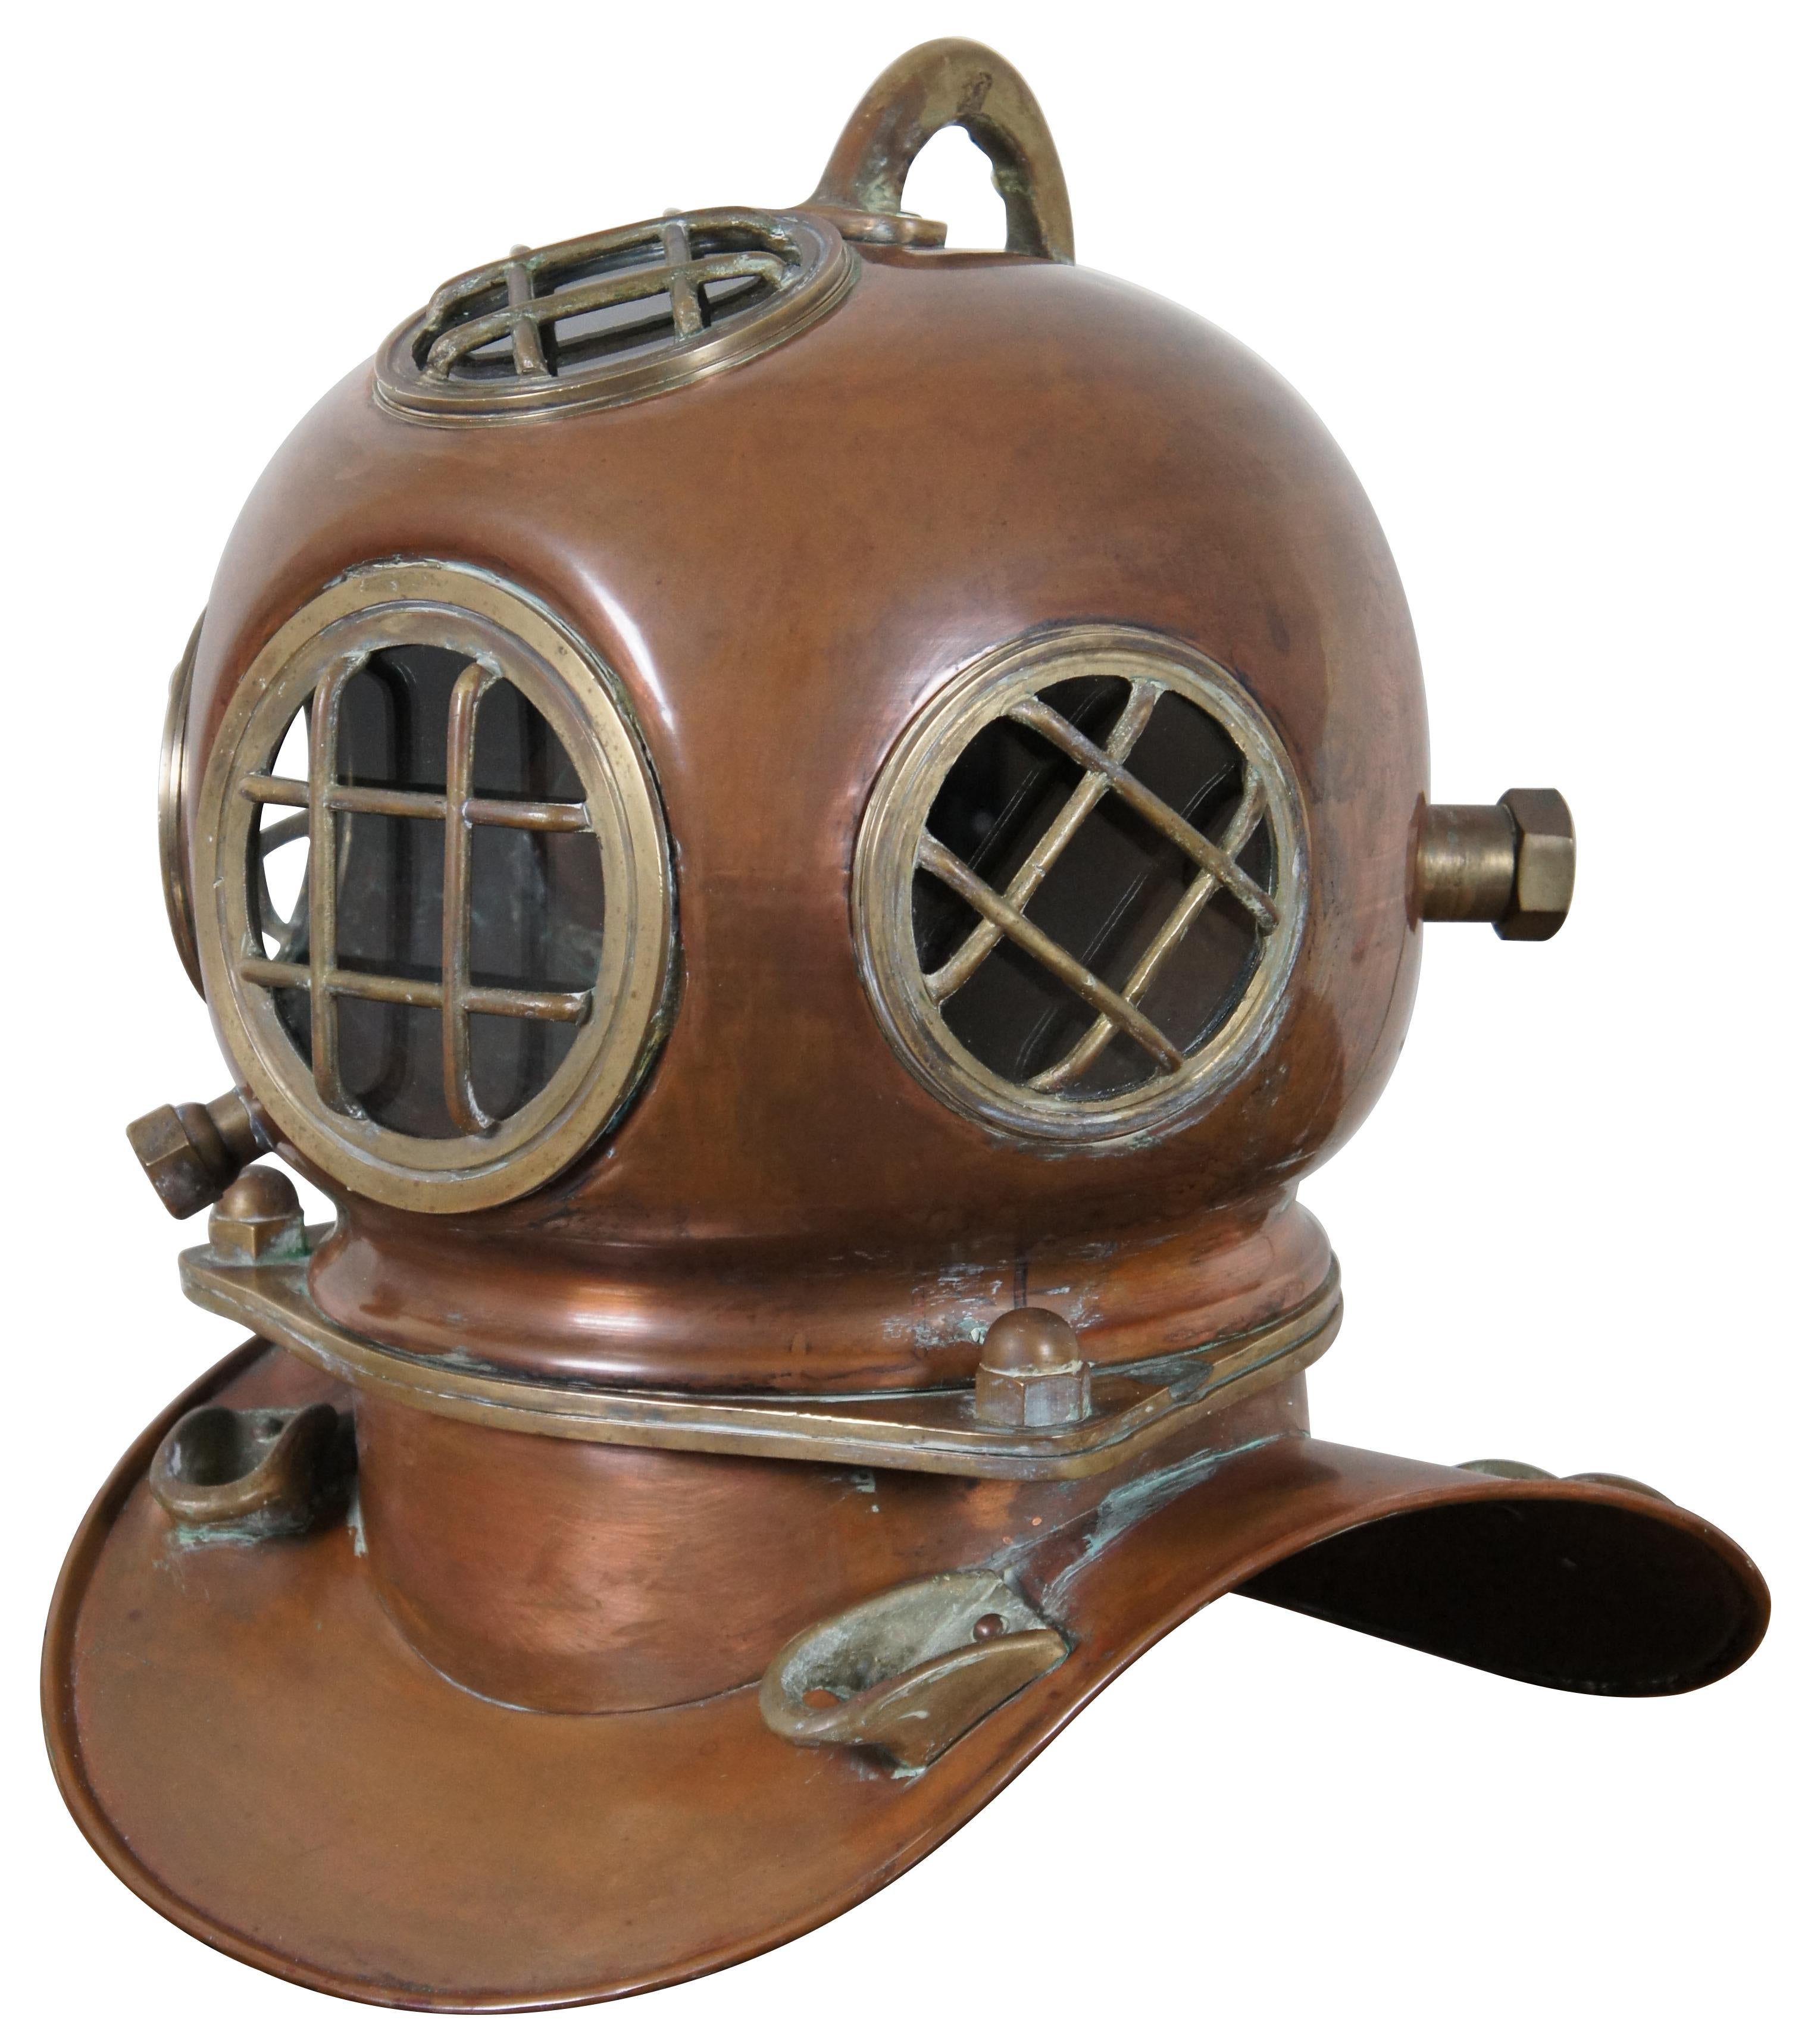 Vintage full size reproduction copper and brass deep sea diver’s helmet, converted to a night light or lamp. Measures: 18